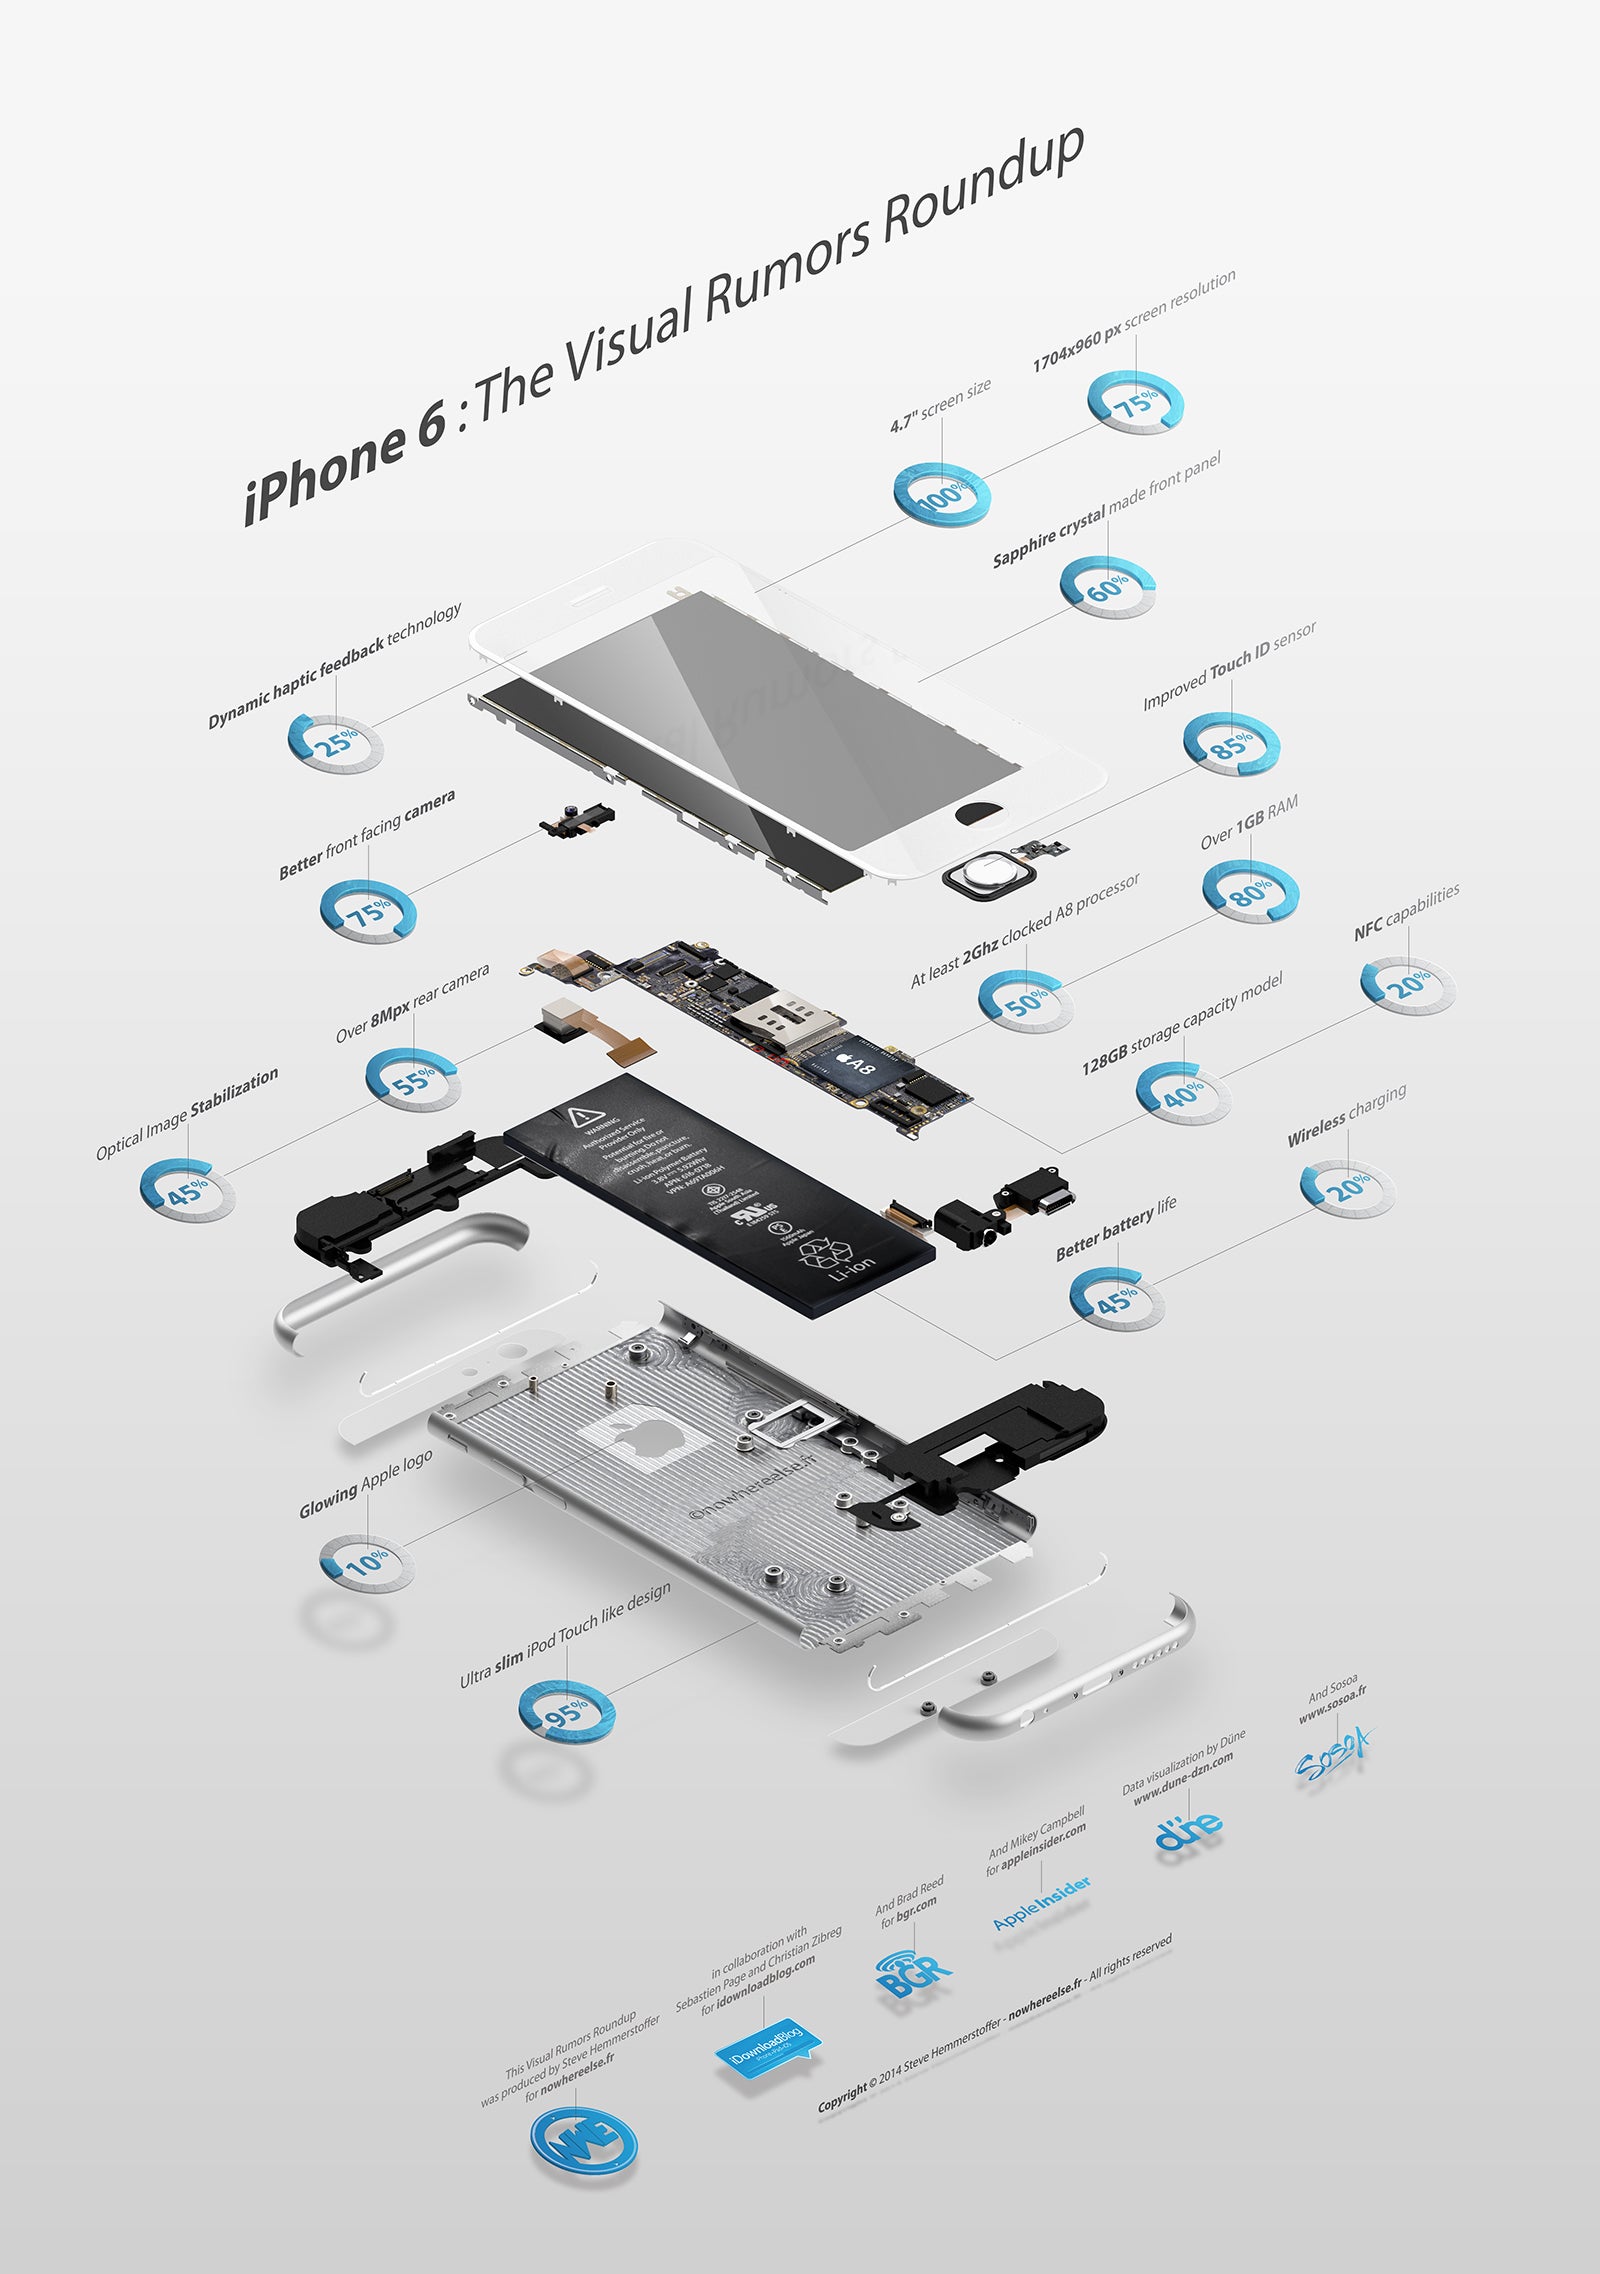 iPhone 6: infographic shows new features and how likely they are to arrive